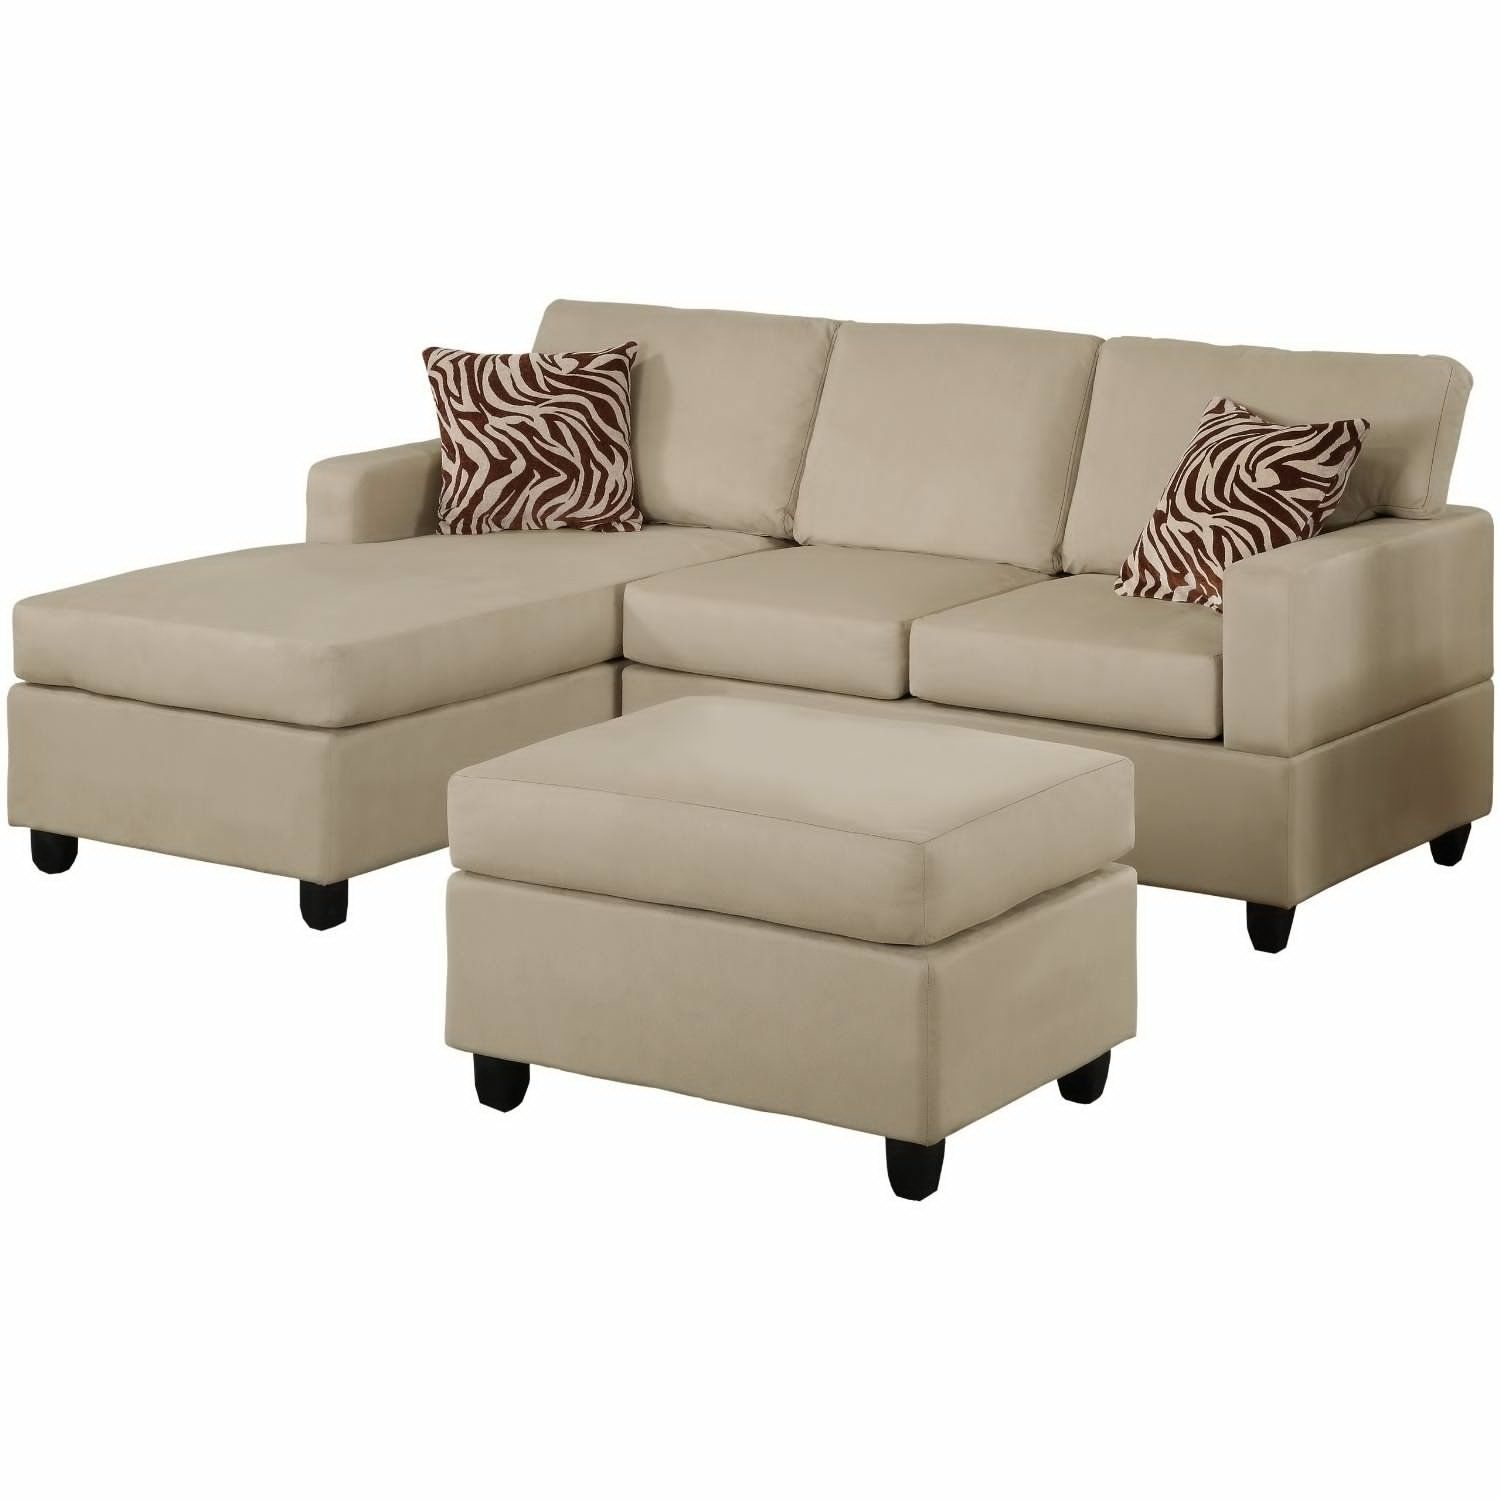 Sectional Sofa Design Thomasville Sectional Sofas Recliners Price Within Thomasville Sectional Sofas 